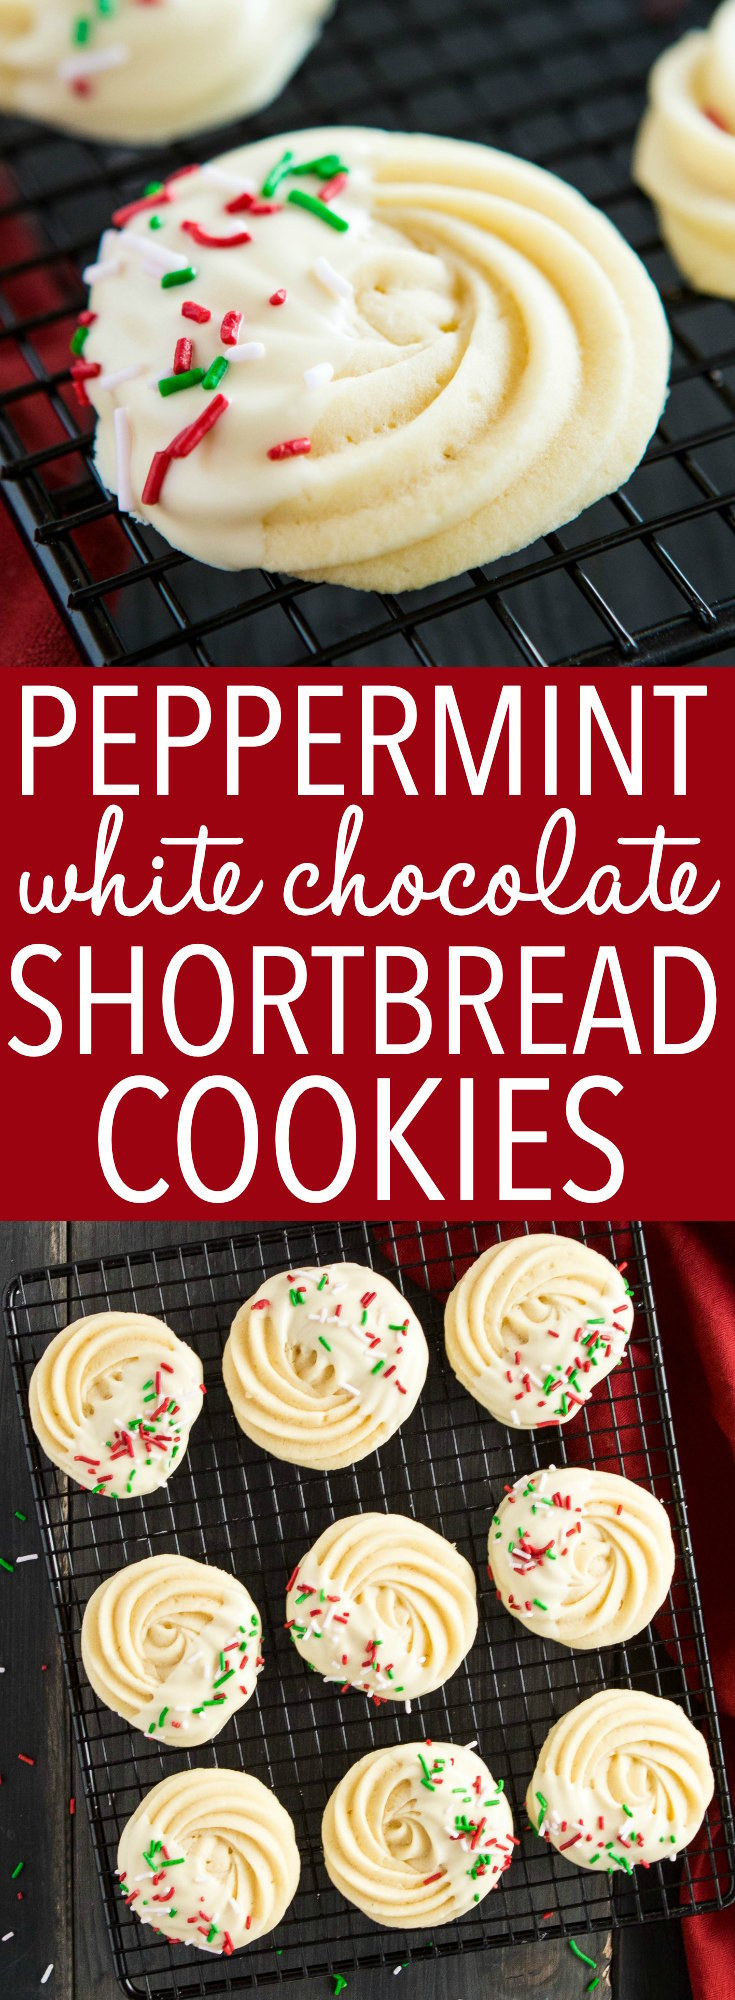 These Peppermint White Chocolate Shortbread Cookies are melt-in-your-mouth, tender, soft and buttery! They're dipped in white chocolate and flavoured with peppermint - perfect for Christmas! Recipe from thebusybaker.ca! #recipe #peppermint #cookies #shortbread #whitechocolate #christmas #holidays #holidaycookies #cookiedecorating #christmascookies via @busybakerblog